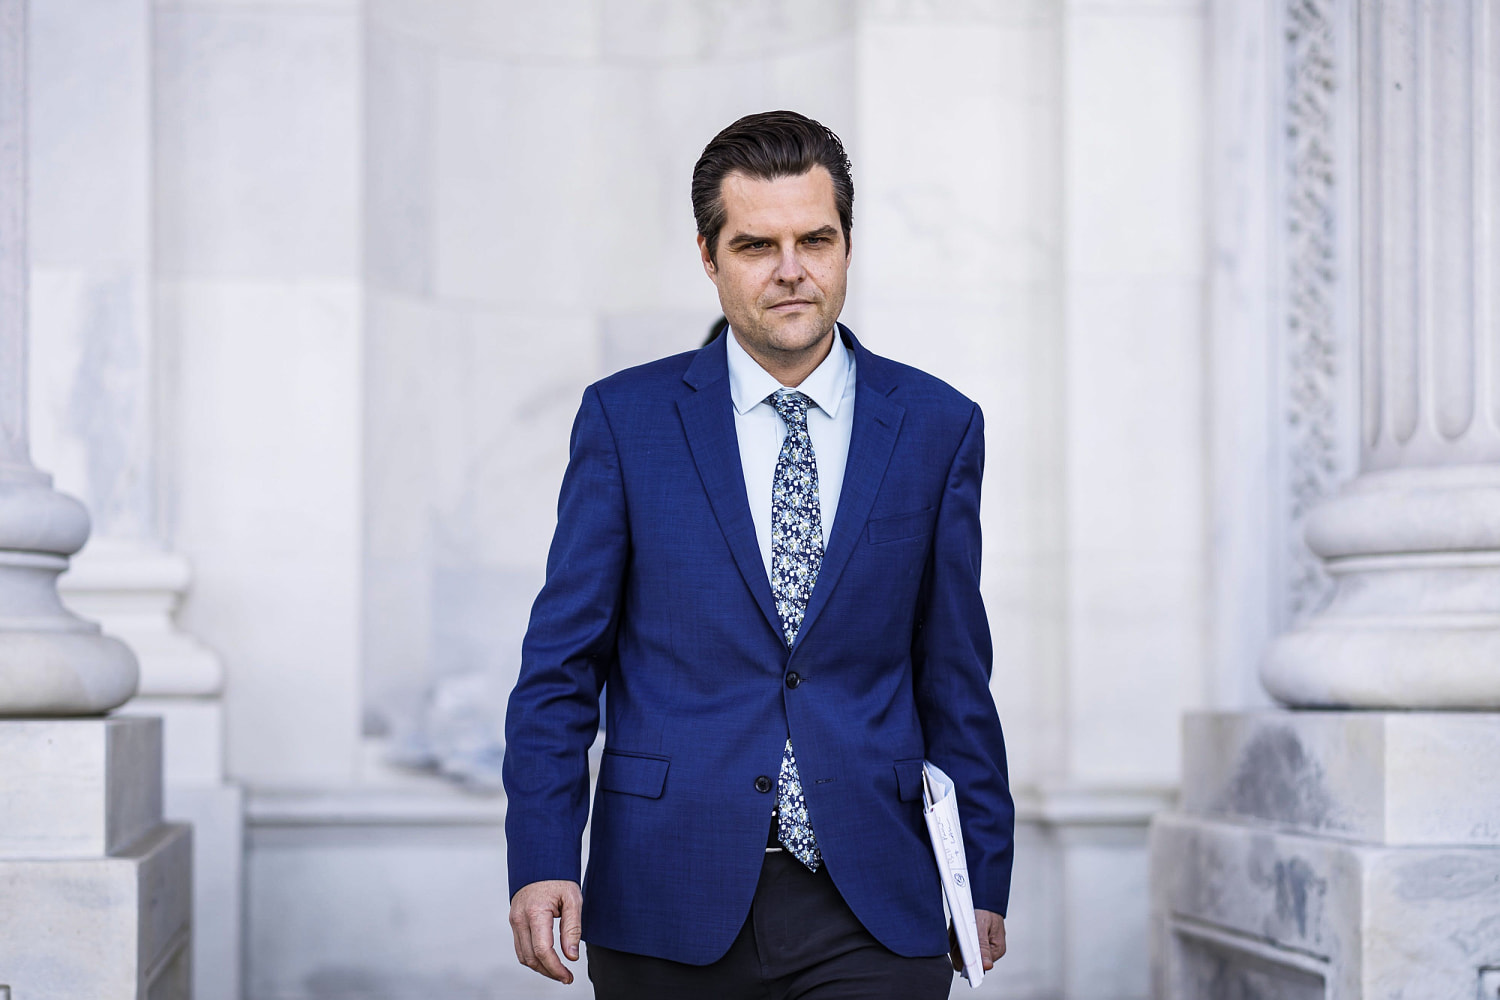 Matt Gaetz is attacking the right problems – just in the wrong way